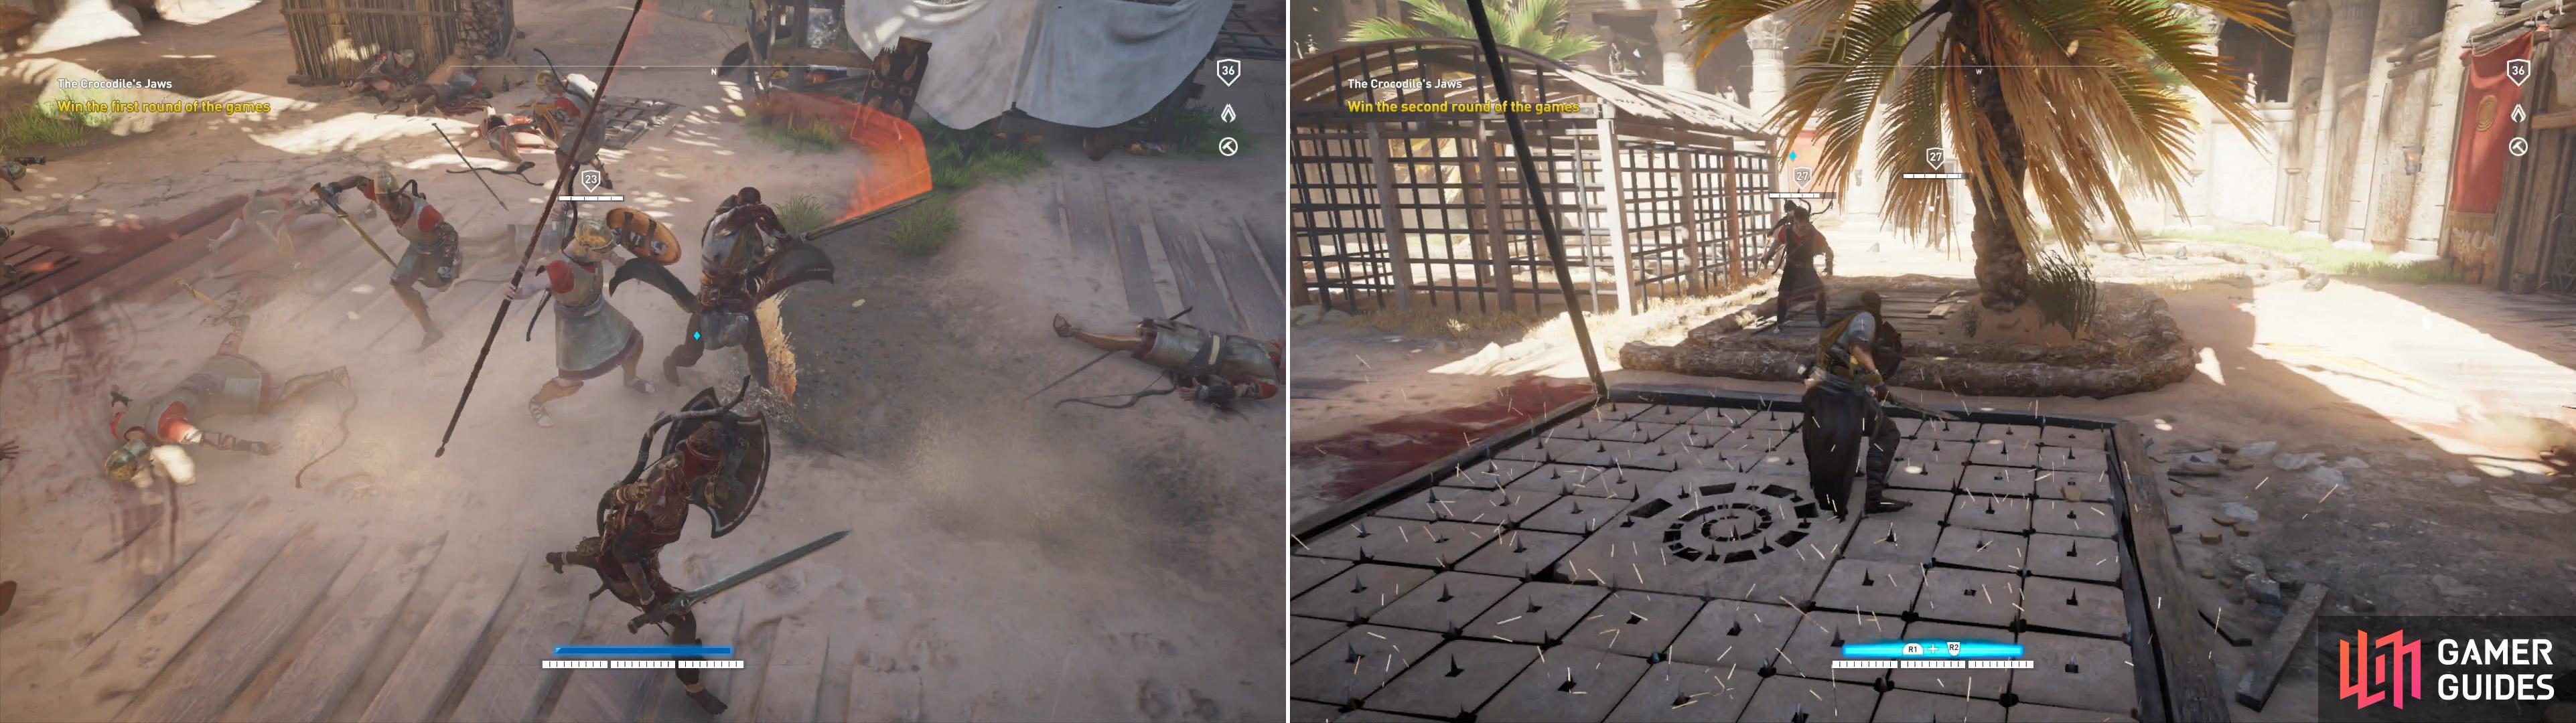 Kensa and Bayek will need to fight through waves of enemies (left). The enemies are threat enough, but the arena is also littered with traps (right).